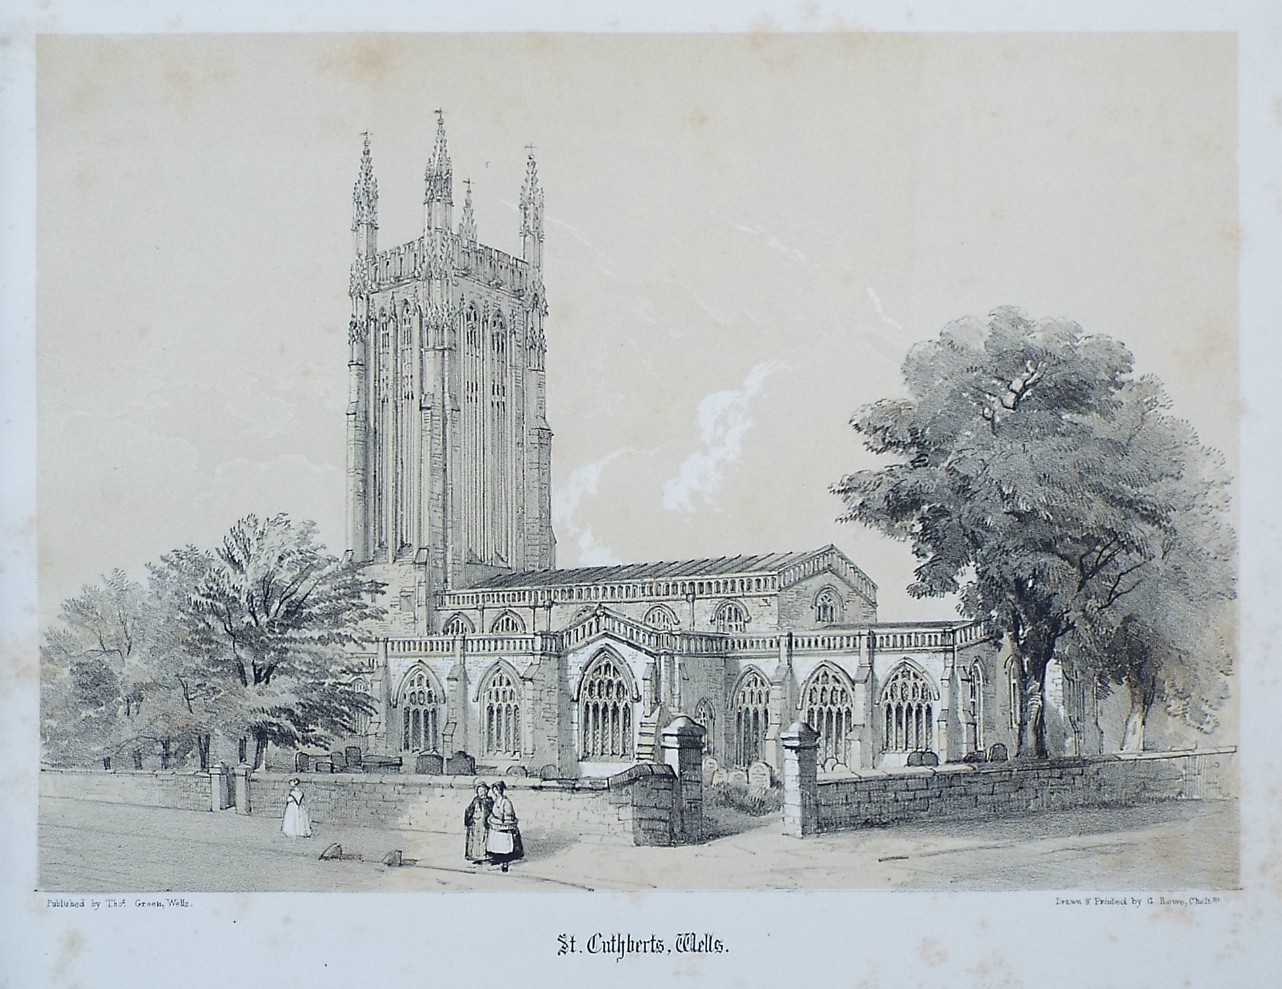 Lithograph - St. Cuthberts, Wells. - Rowe